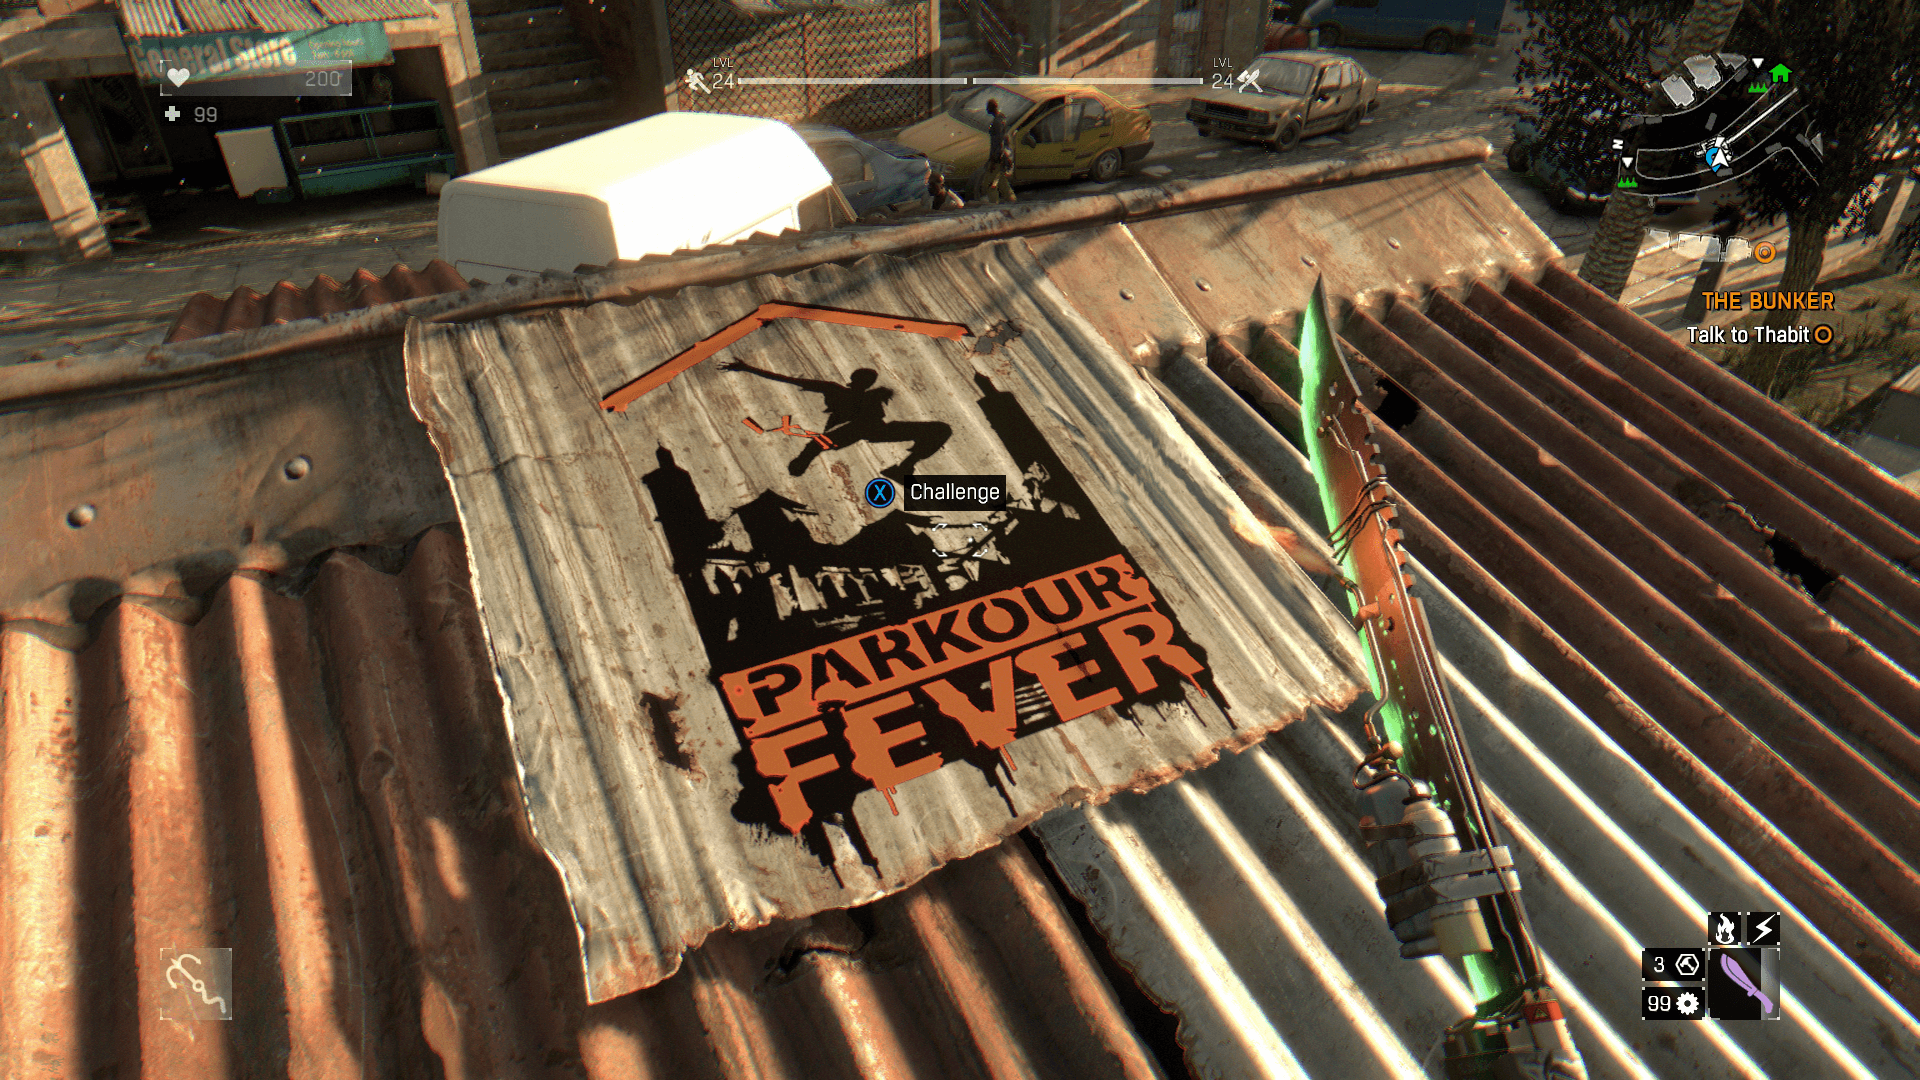 Dying Light Gets Patch 1.06 On PS4 And Xbox One, Adds Free DLC.